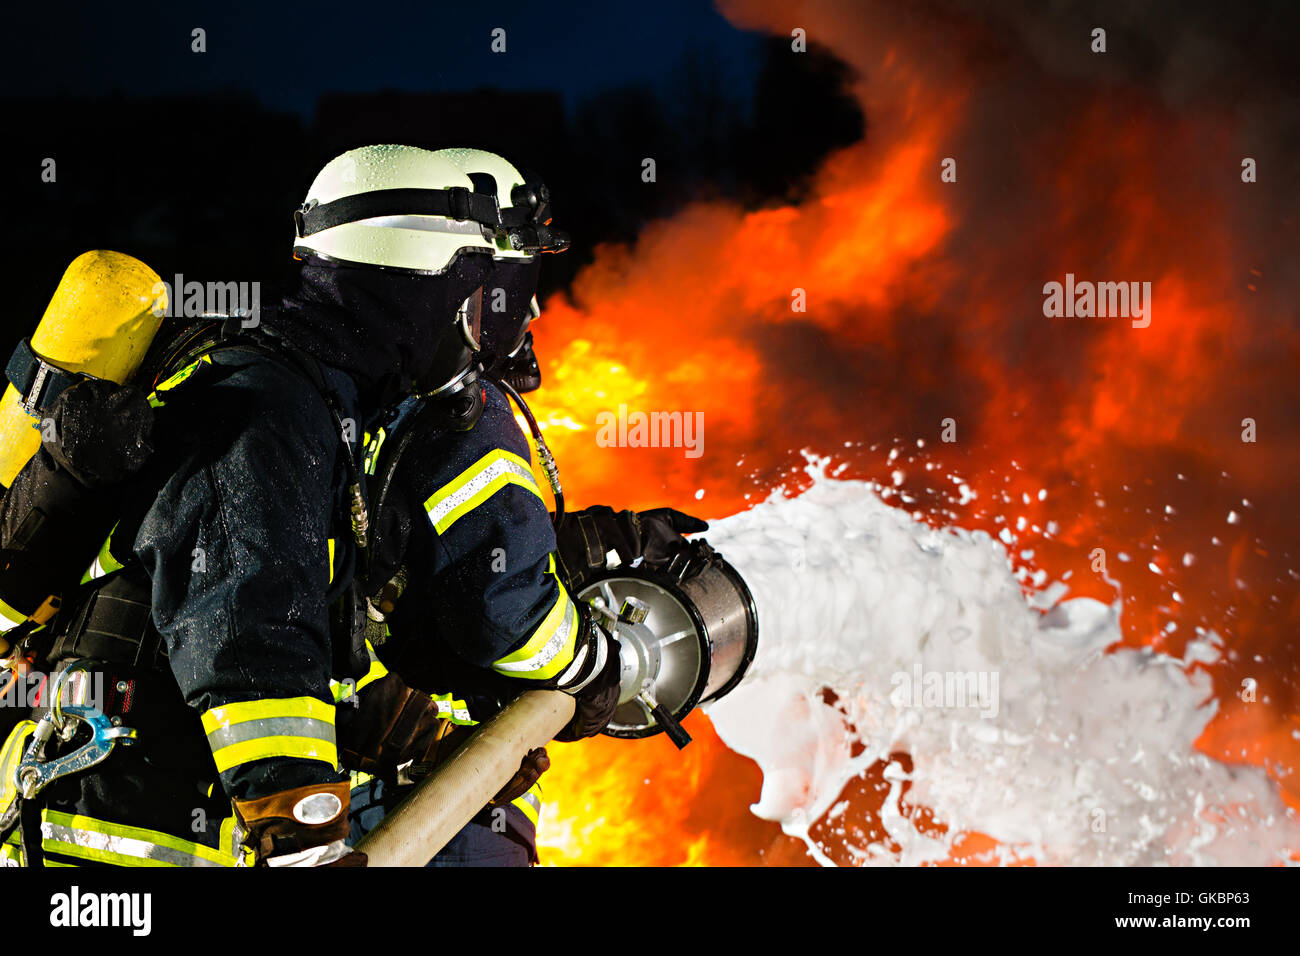 firefighters - firefighters put out a fire Stock Photo